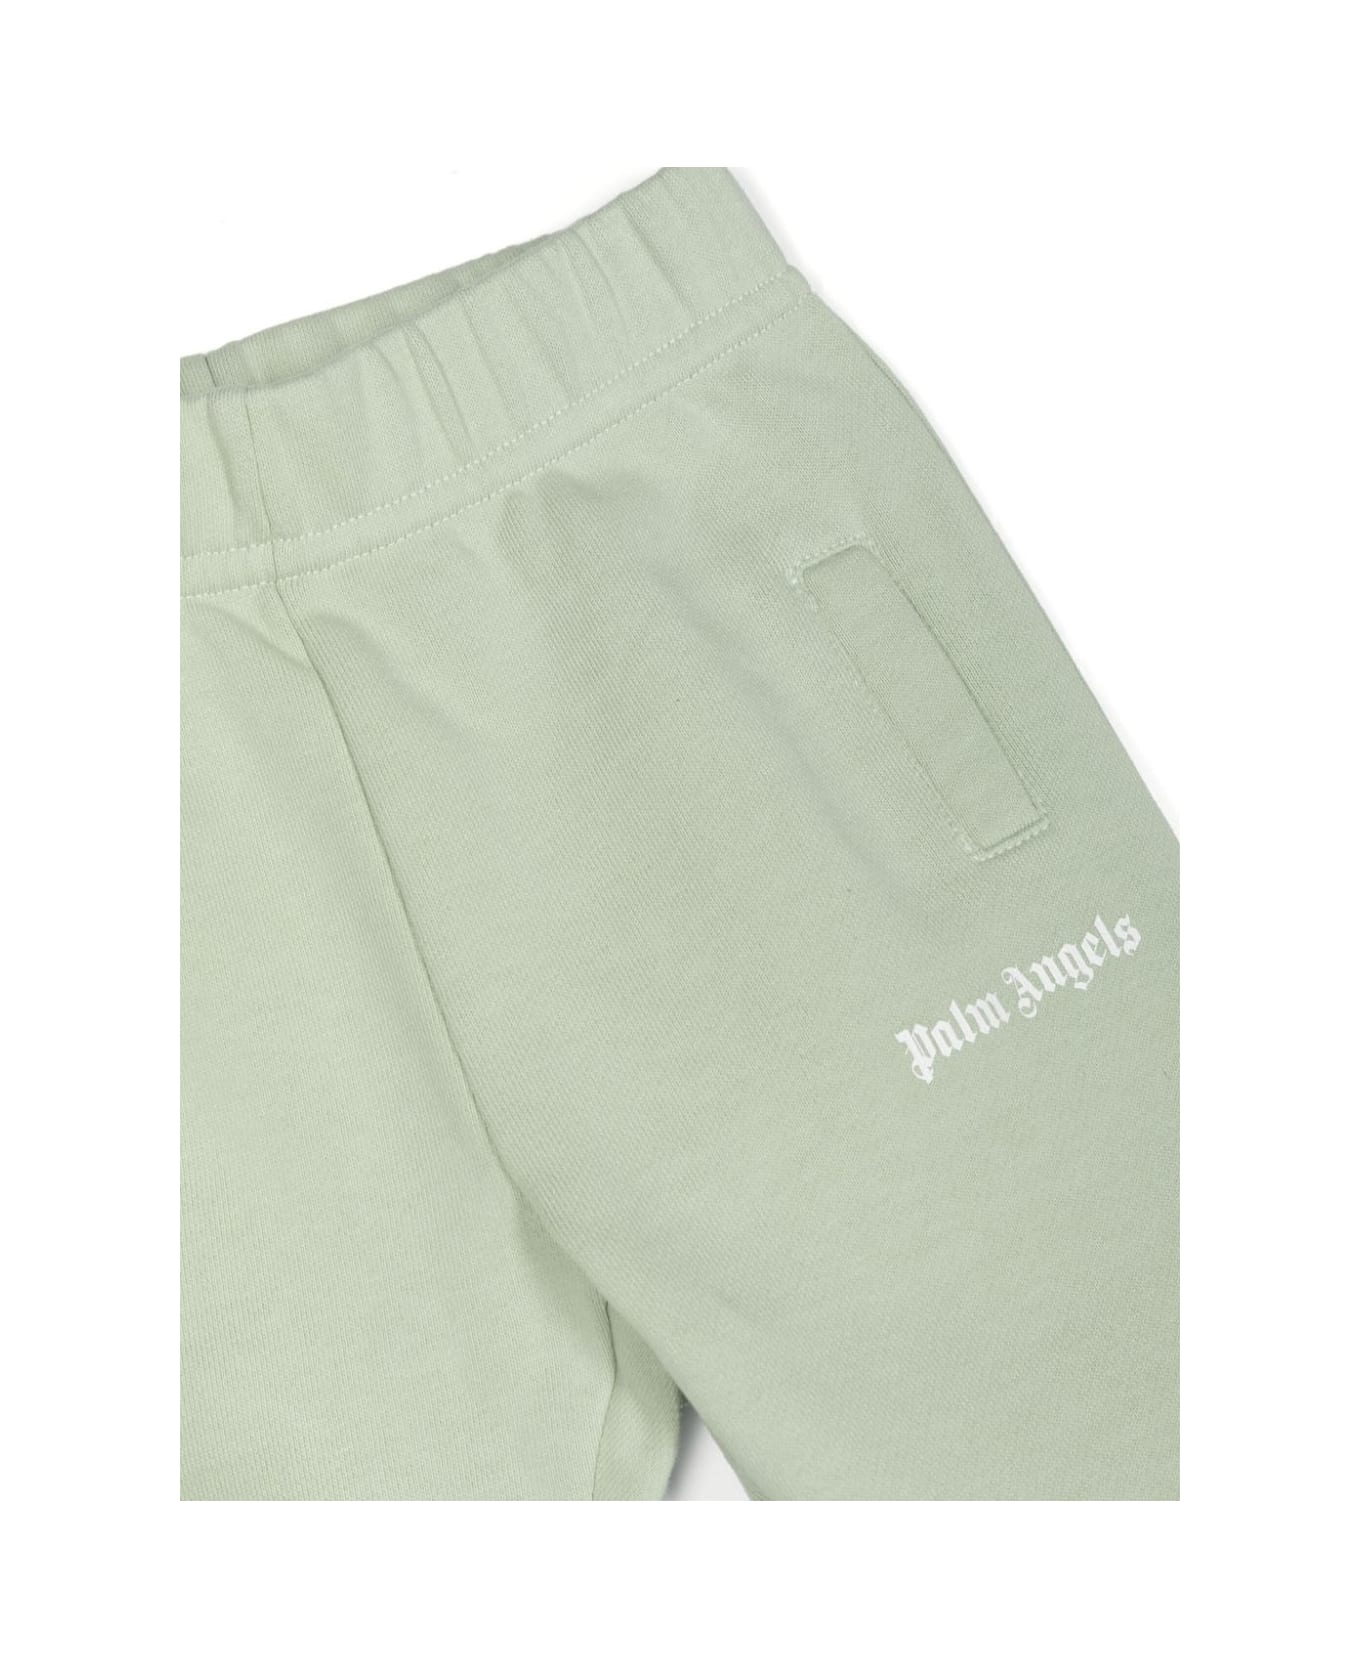 Palm Angels Light Green Cotton Joggers With Logo - Green